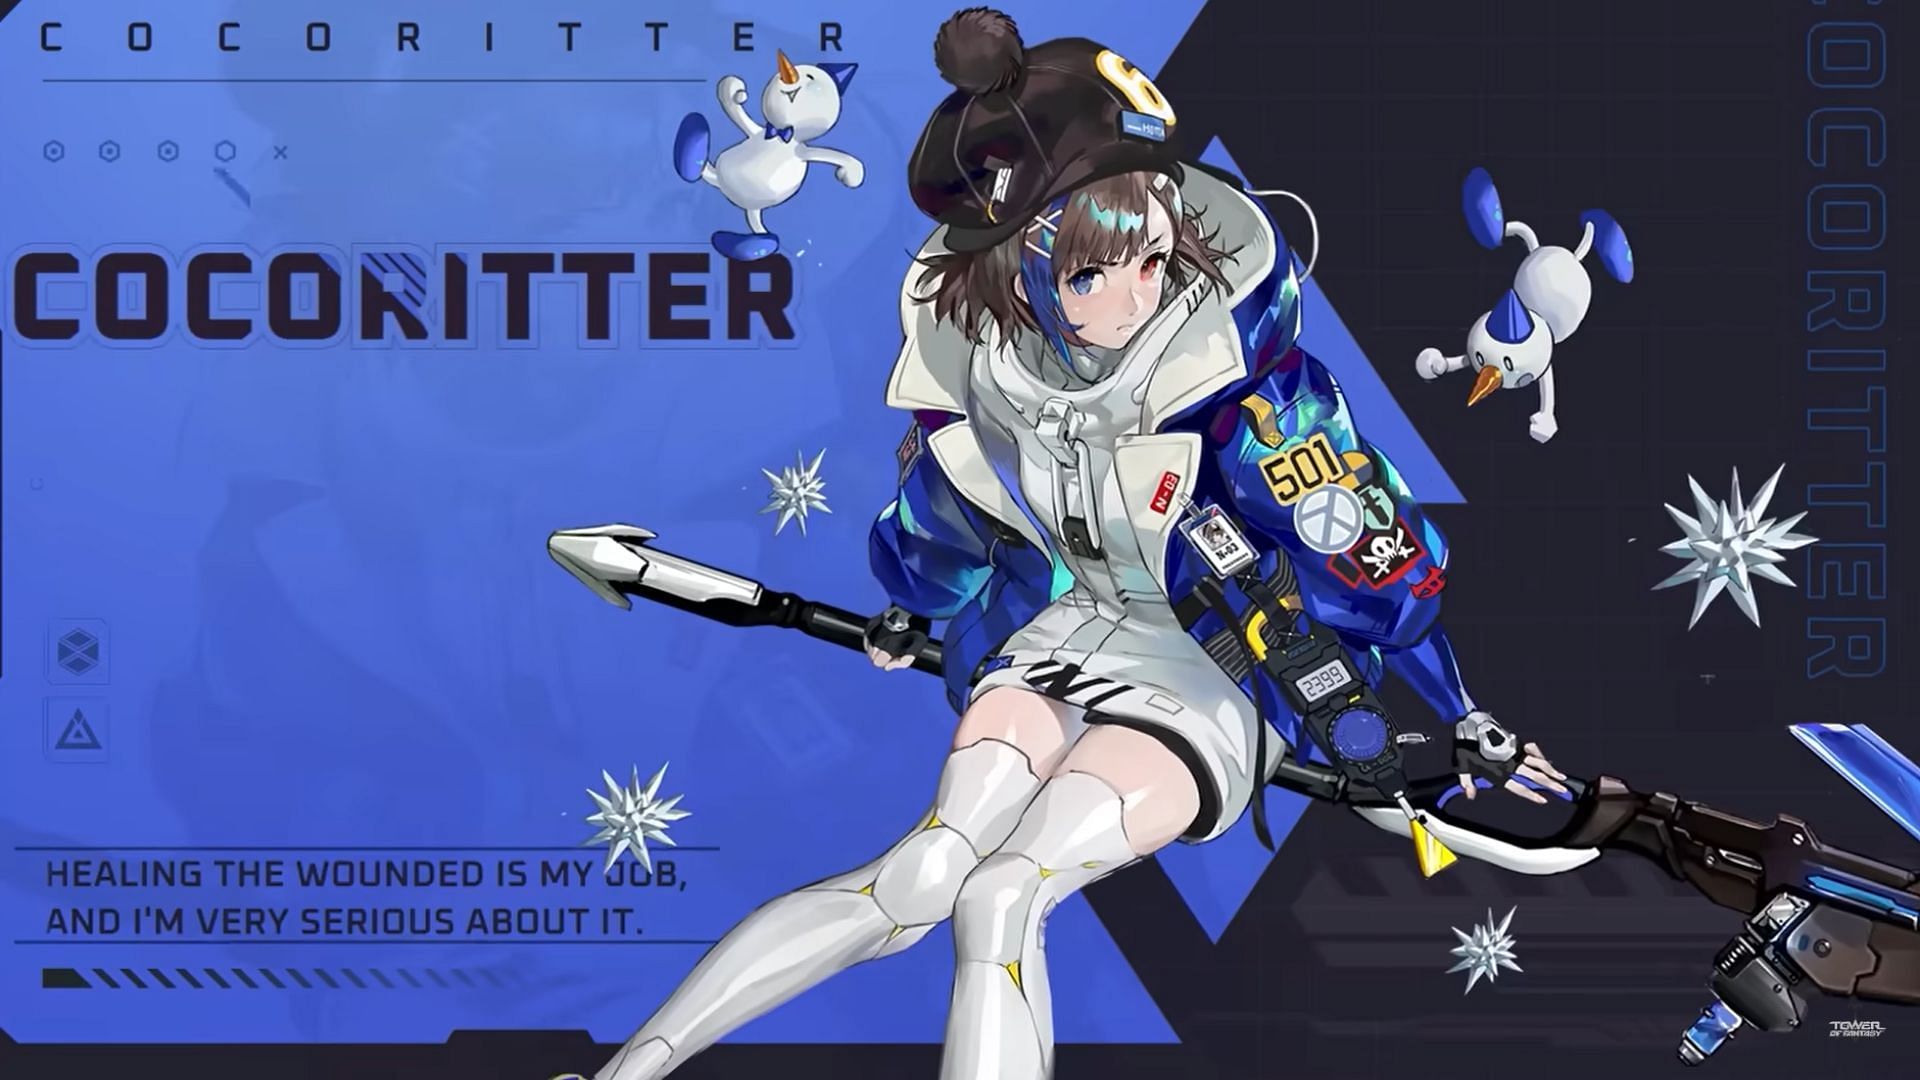 Cocoritter with her weapon Absolute Zero in Tower of Fantasy (Image via Hotta Studio)